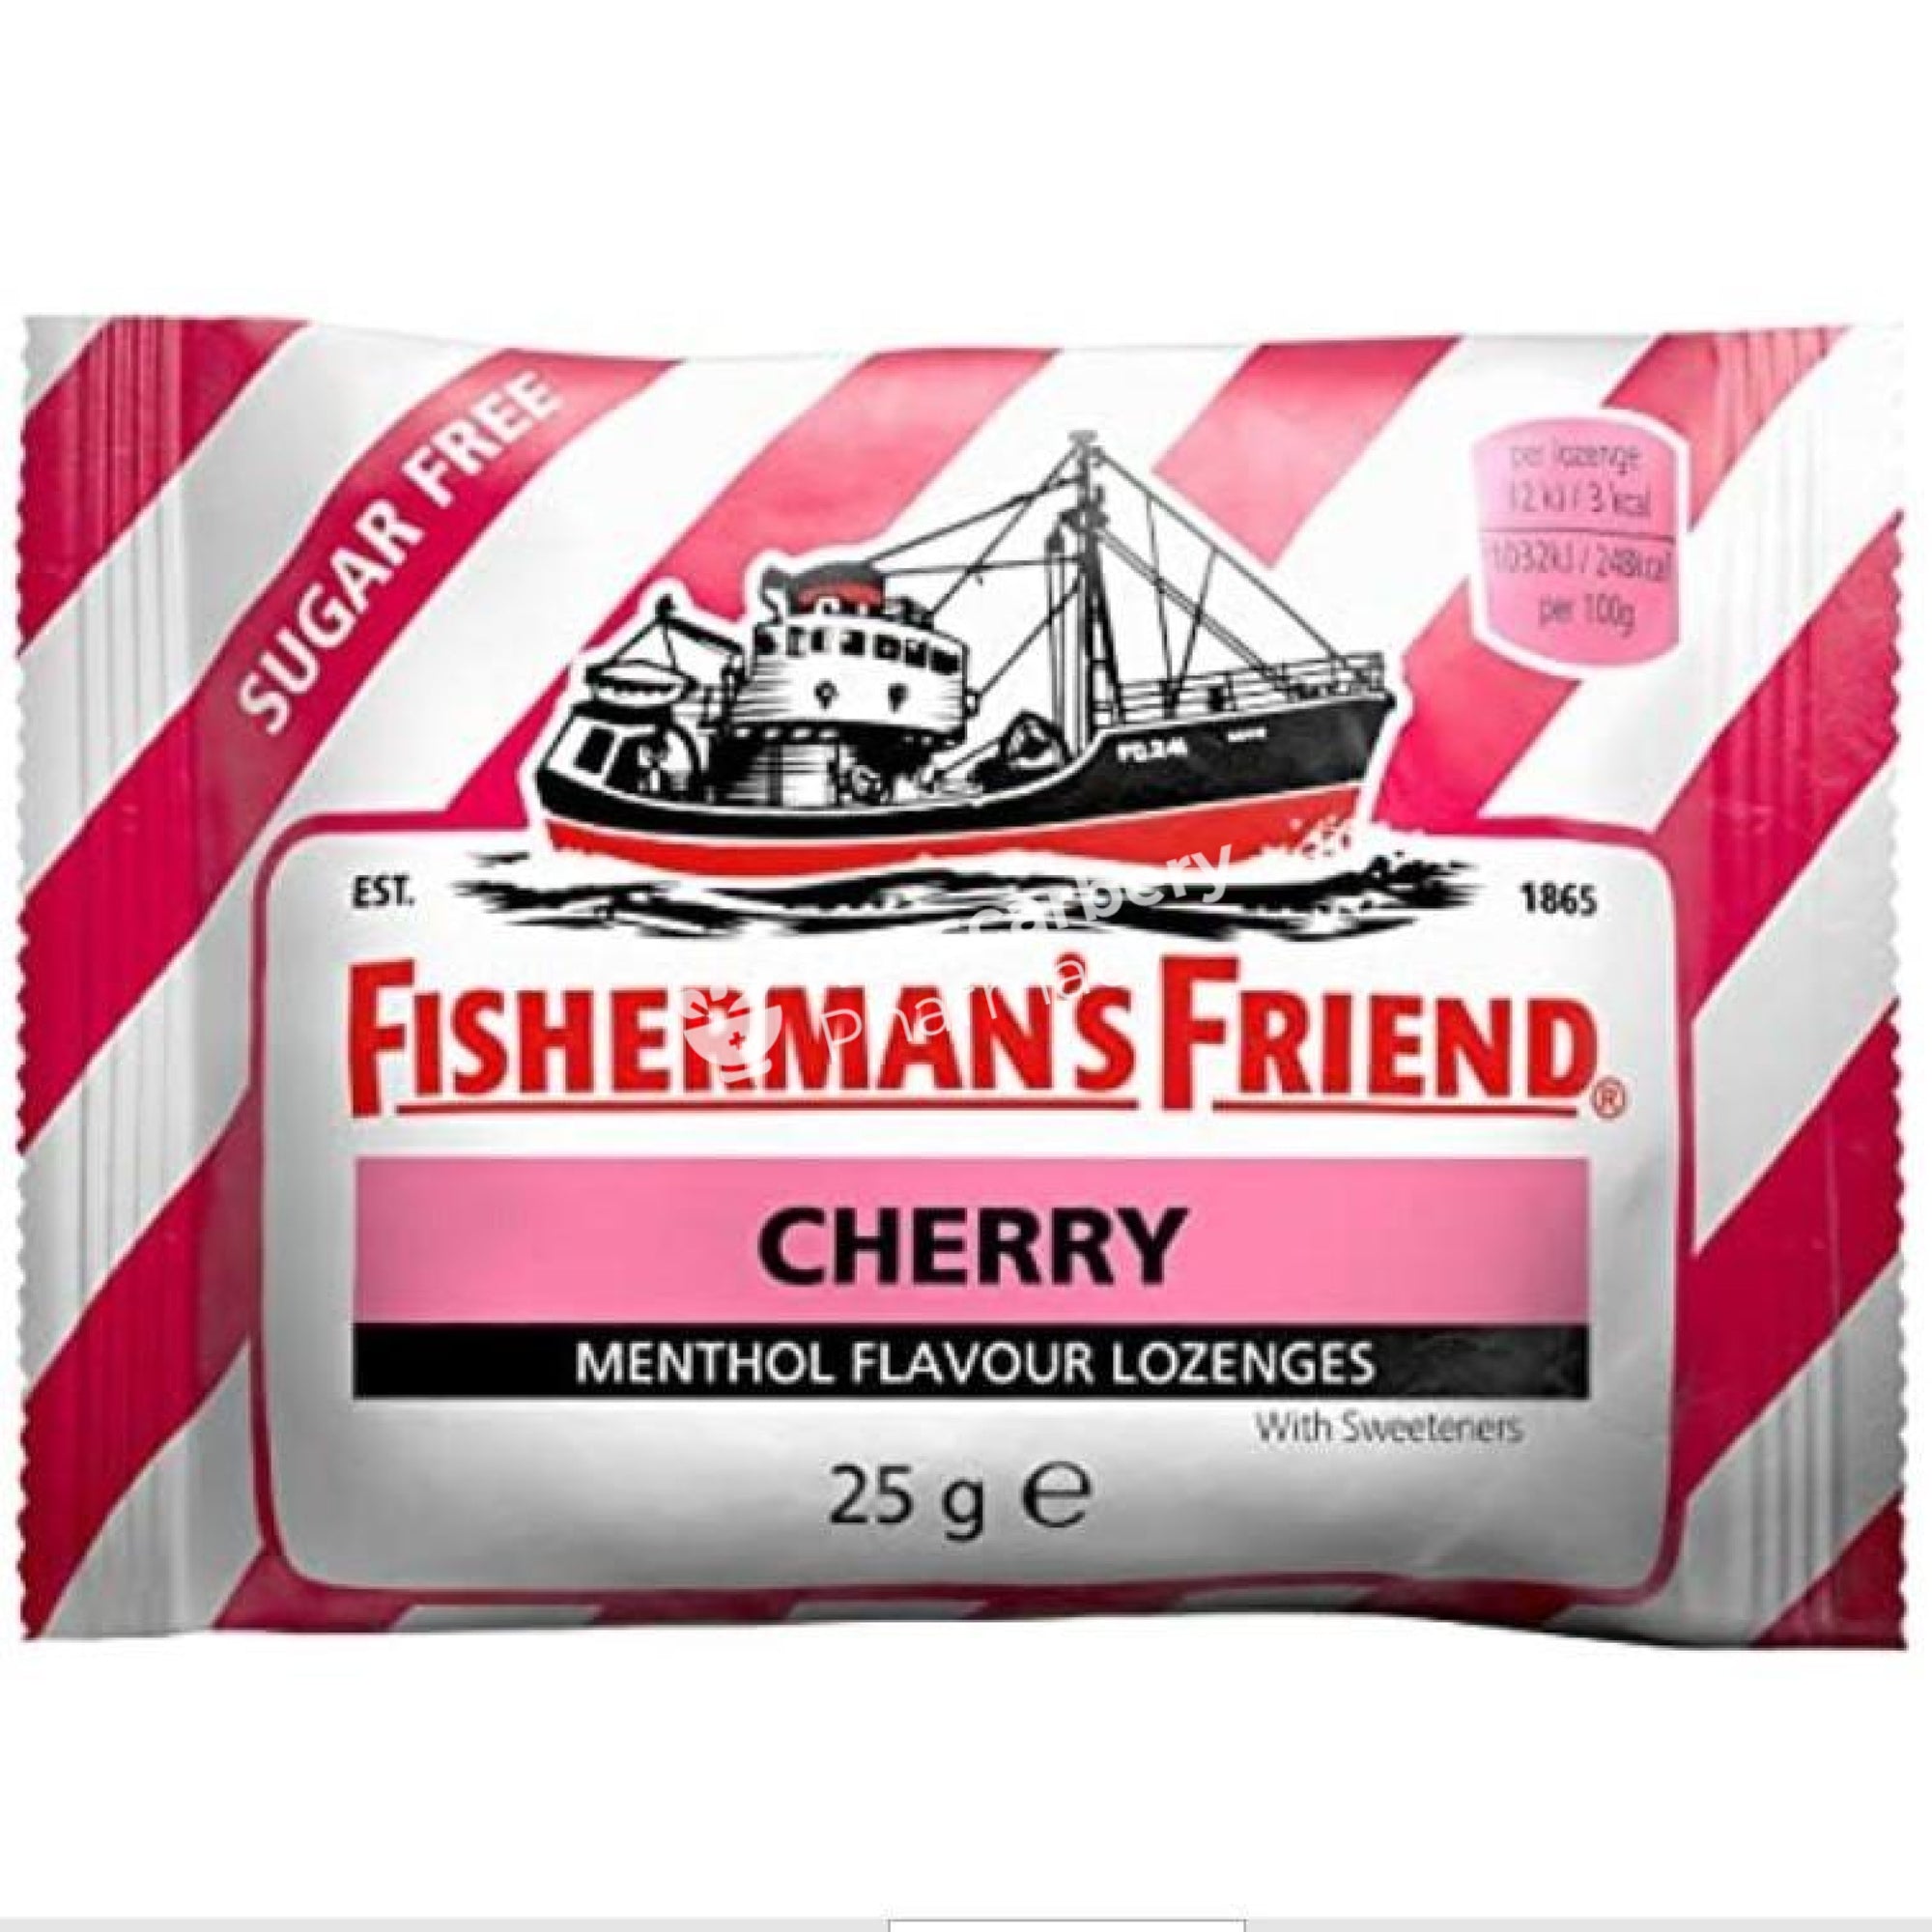 Fishermans Friend Sugar Free Cherry - Menthol Flavour Lozenges With Sweeteners